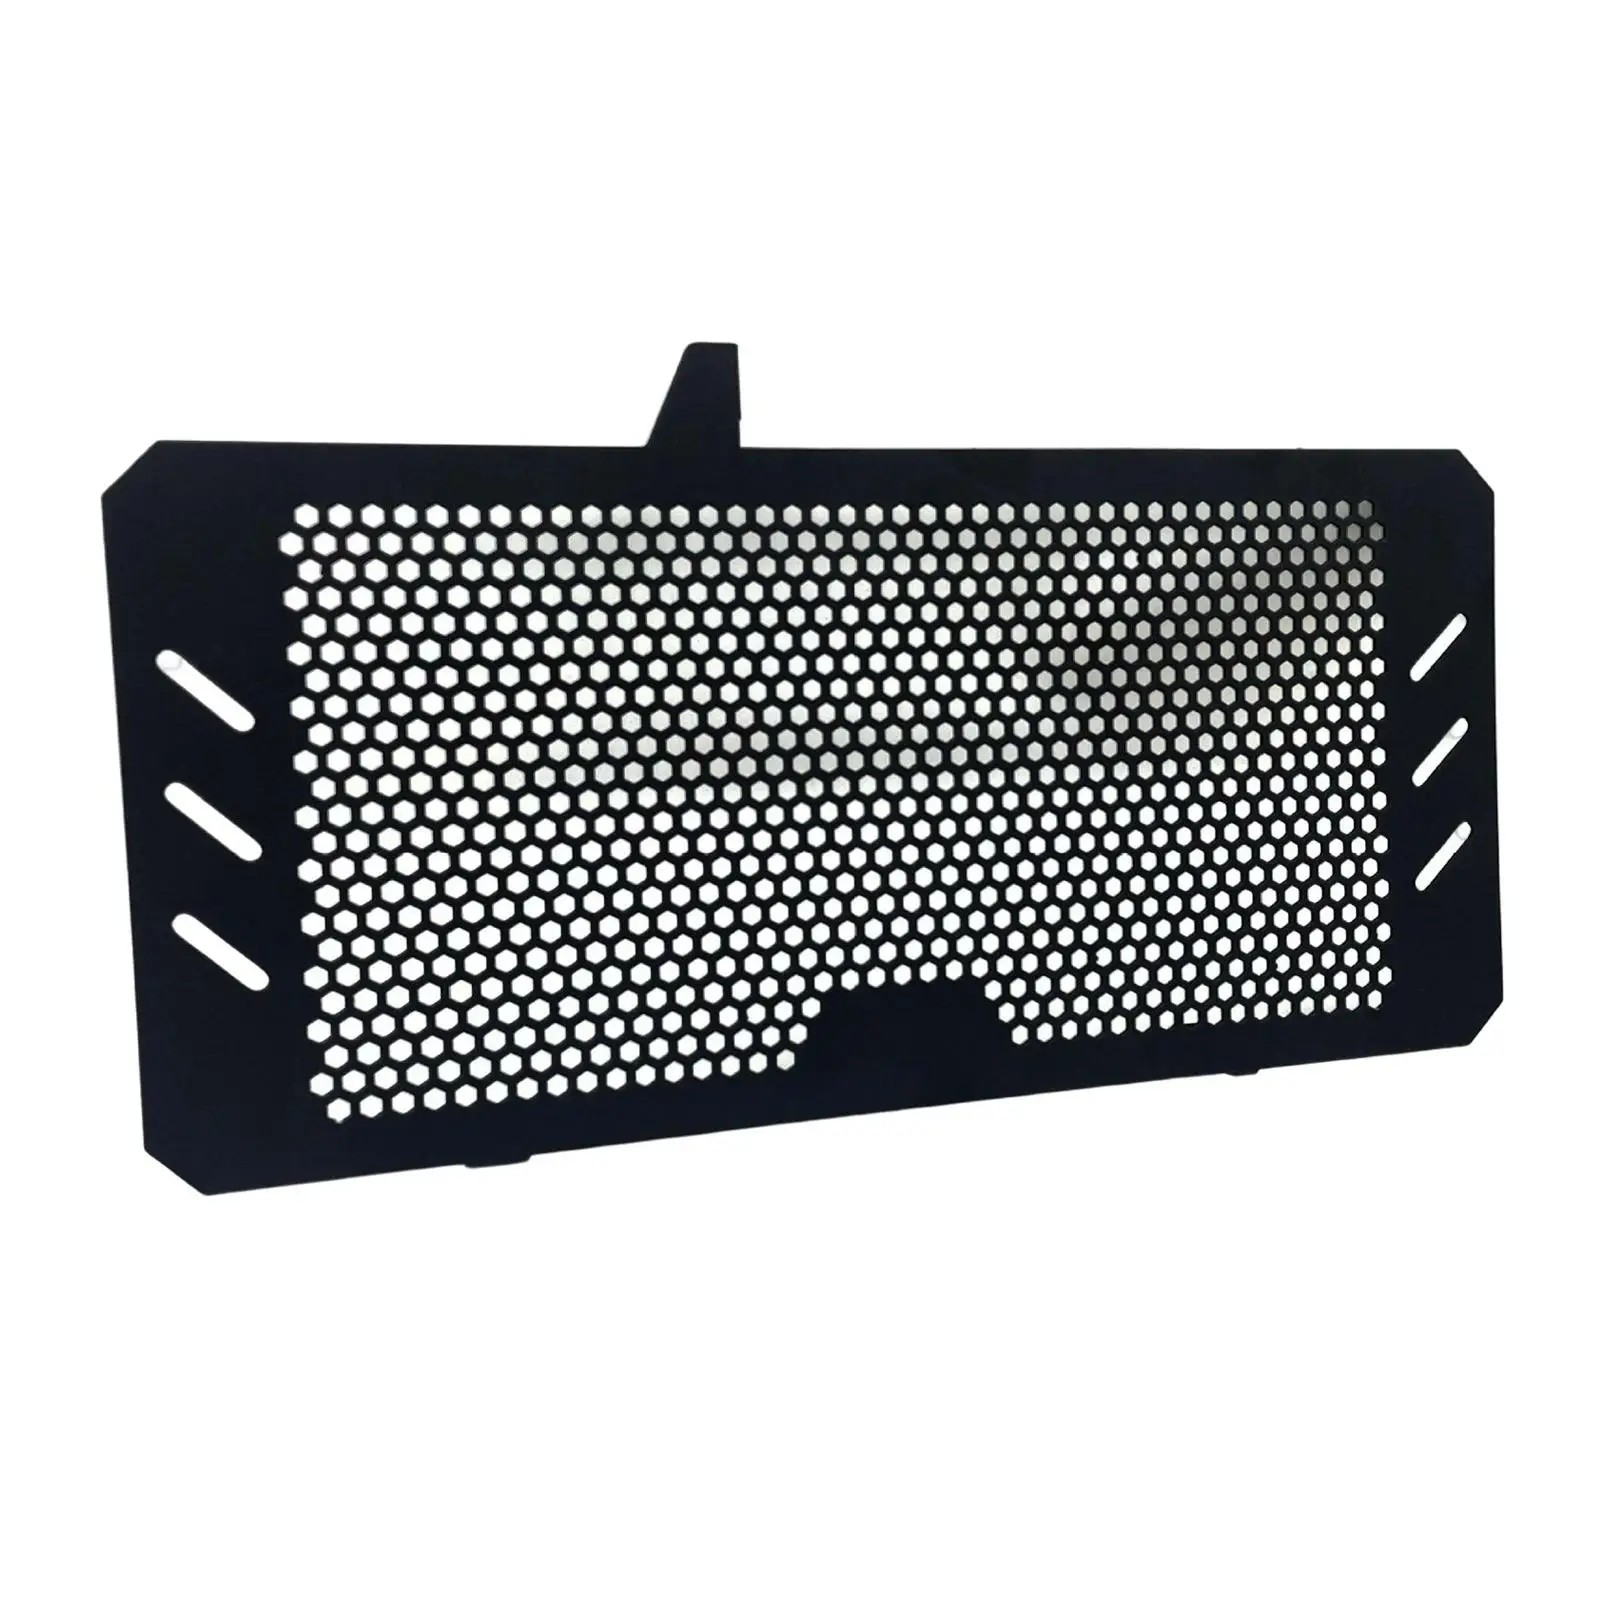 Motorcycle Radiator Grille Guard Protector for Honda NC750 Black Parts